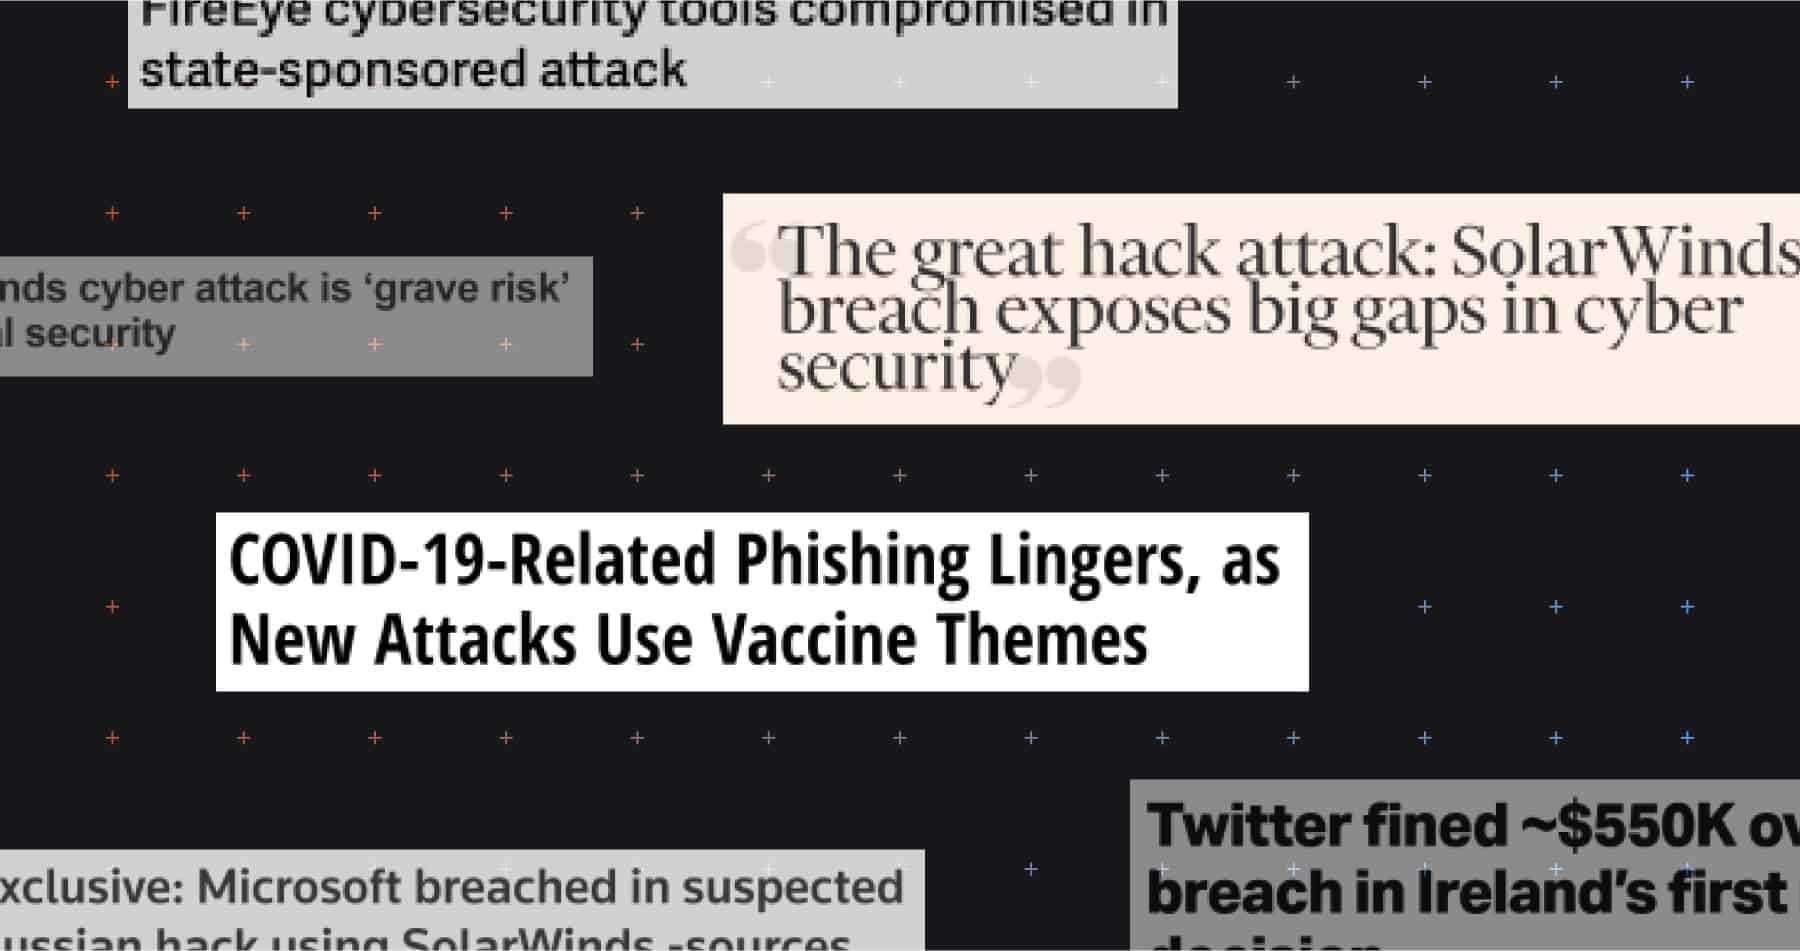 Cyber Security News Today  Articles on Cyber Security, Malware